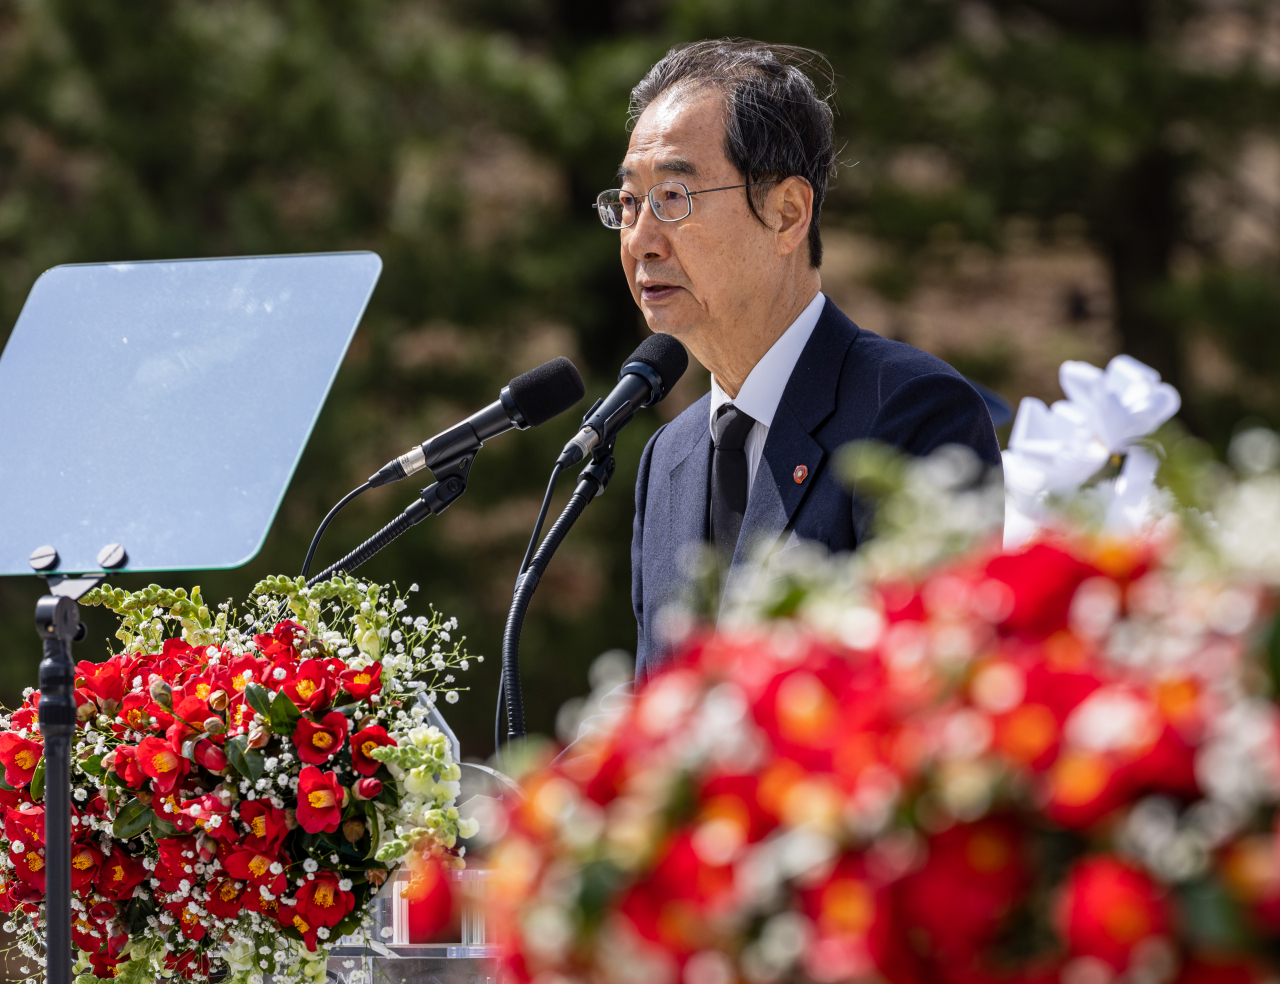 Prime Minister Han Duk-soo speaks at the memorial event held at the peace park in Jeju City on Monday. (Yonhap)